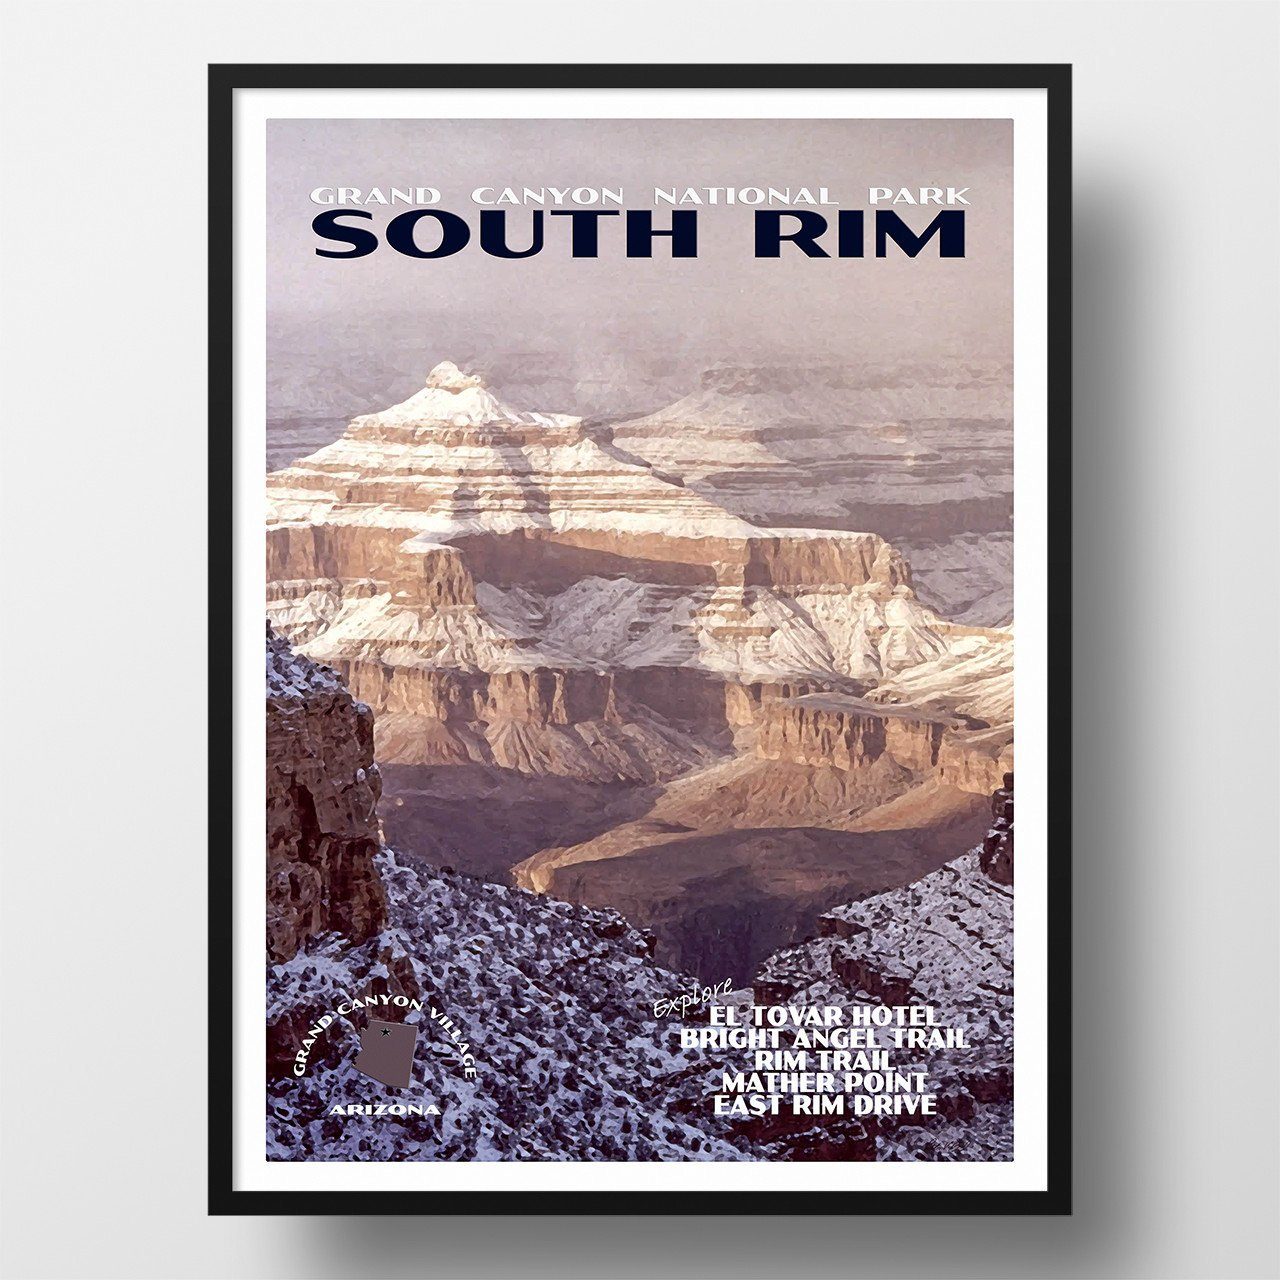 Grand Canyon National Park Poster-South Rim in the Snow